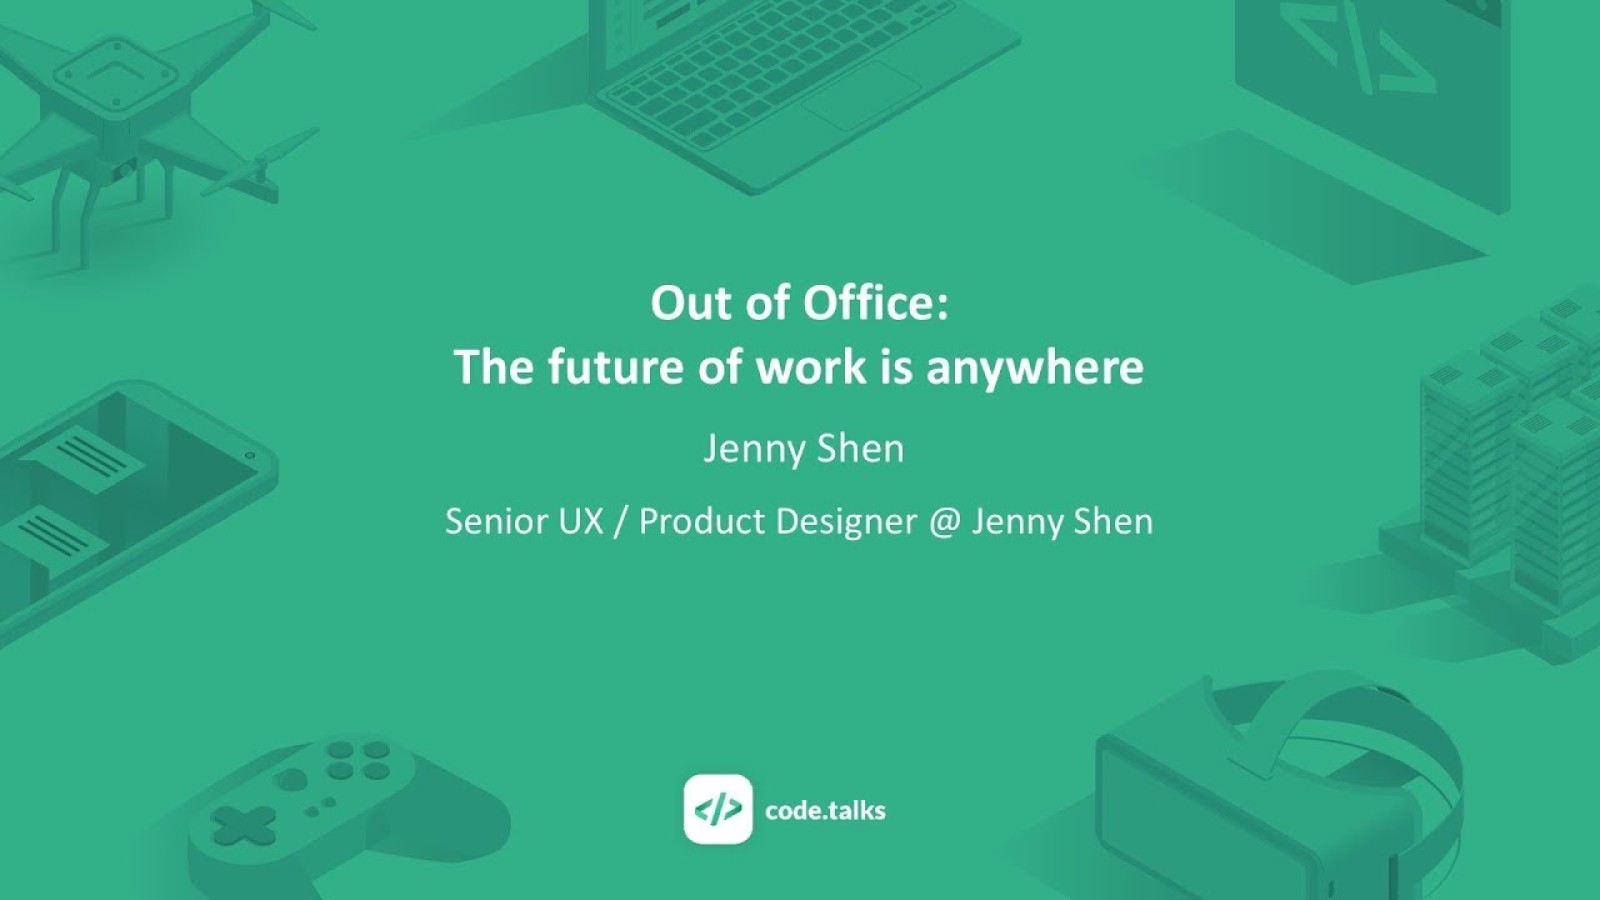 Out of Office: The future of work is anywhere